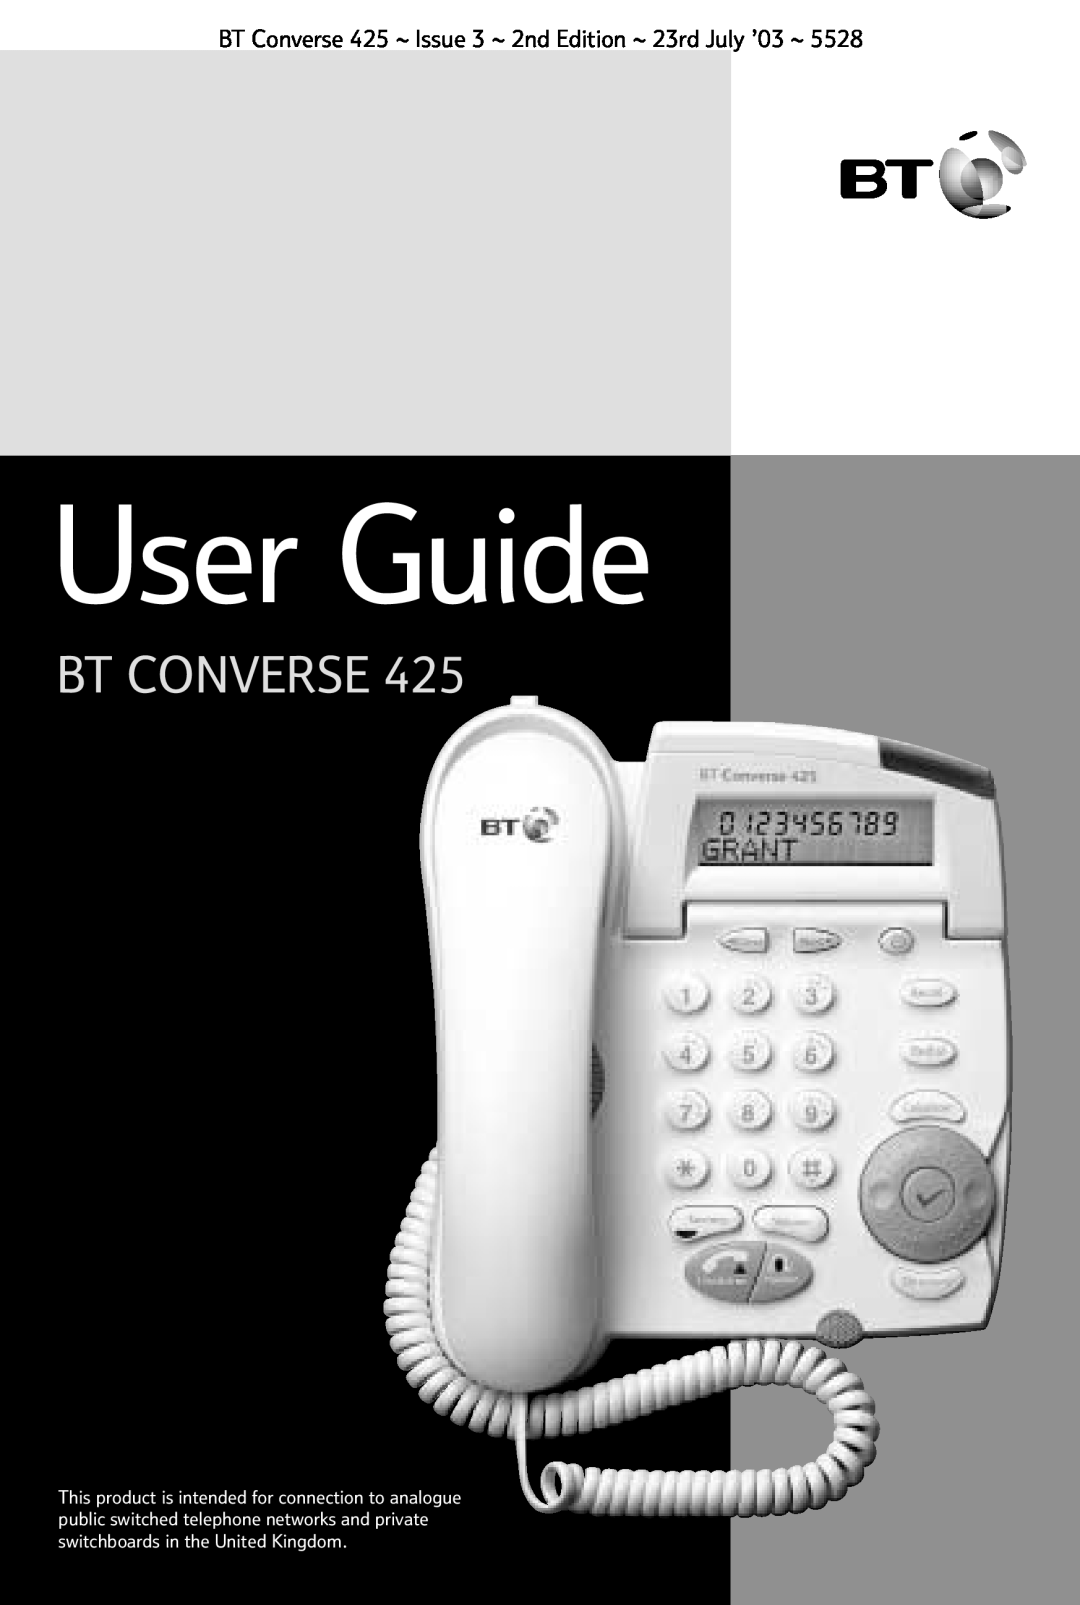 BT manual User Guide, Bt Converse, BT Converse 425 ~ Issue 3 ~ 2nd Edition ~ 23rd July ’03 ~ 